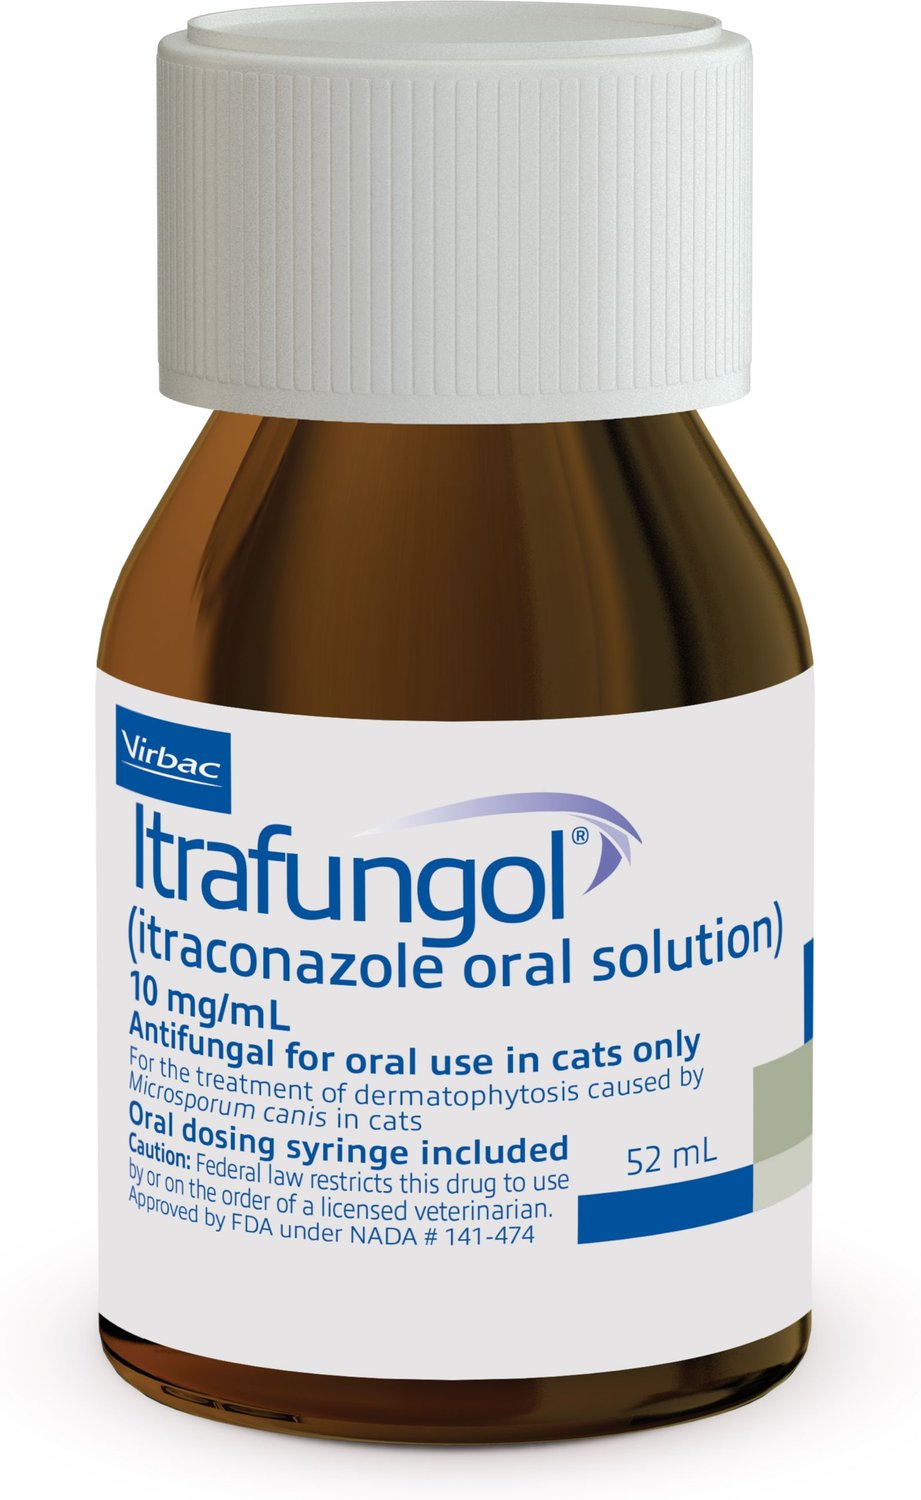 Itrafungol Oral Solution for Cats, 10 mg/mL, 52mL